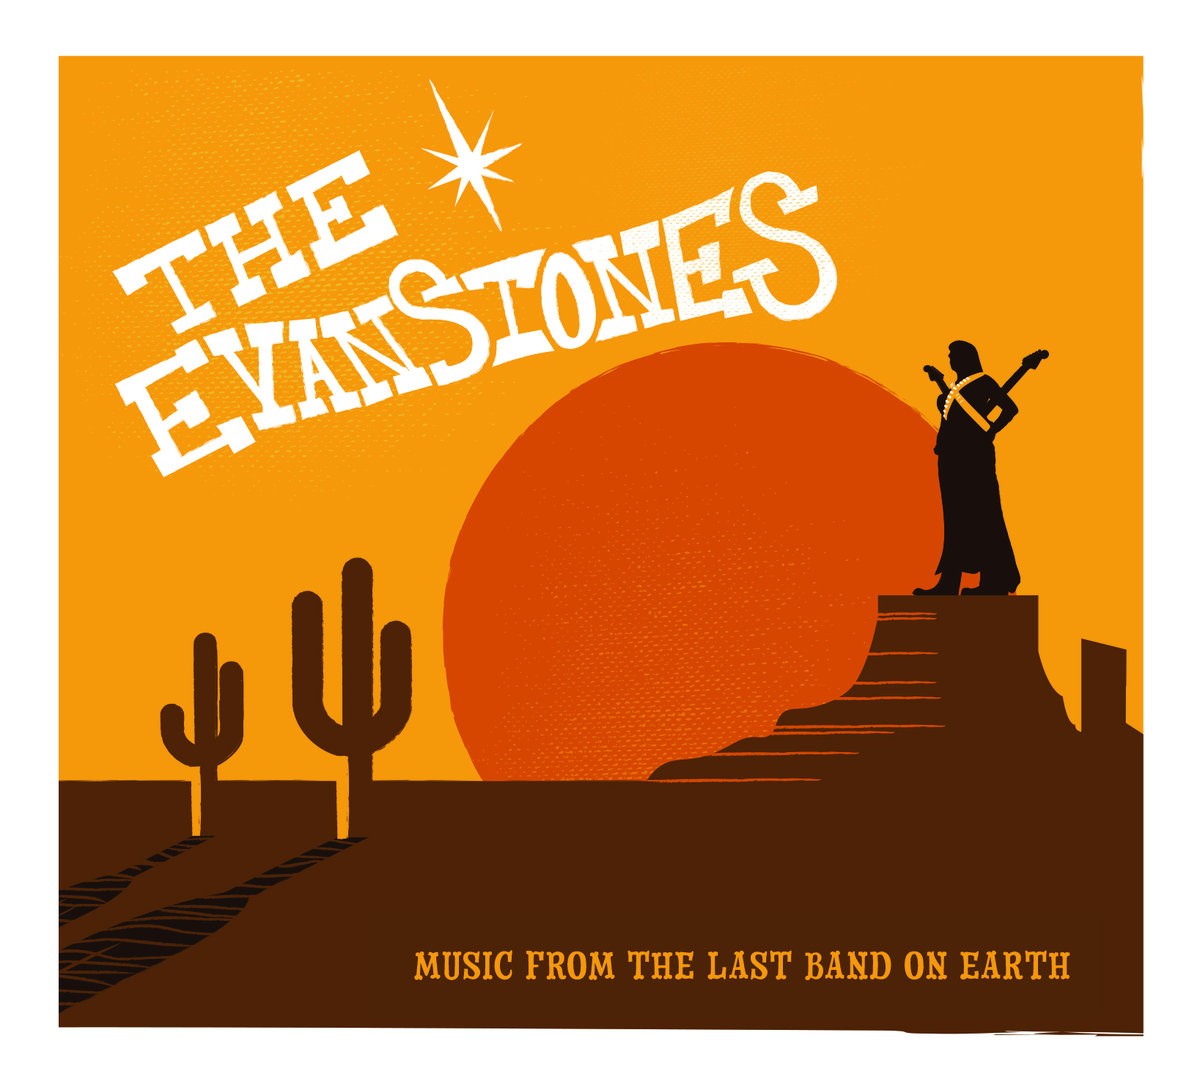 a2734987439_10 The Evanstones to release new album with Sharawaji Records - SHARAWAJI.COM